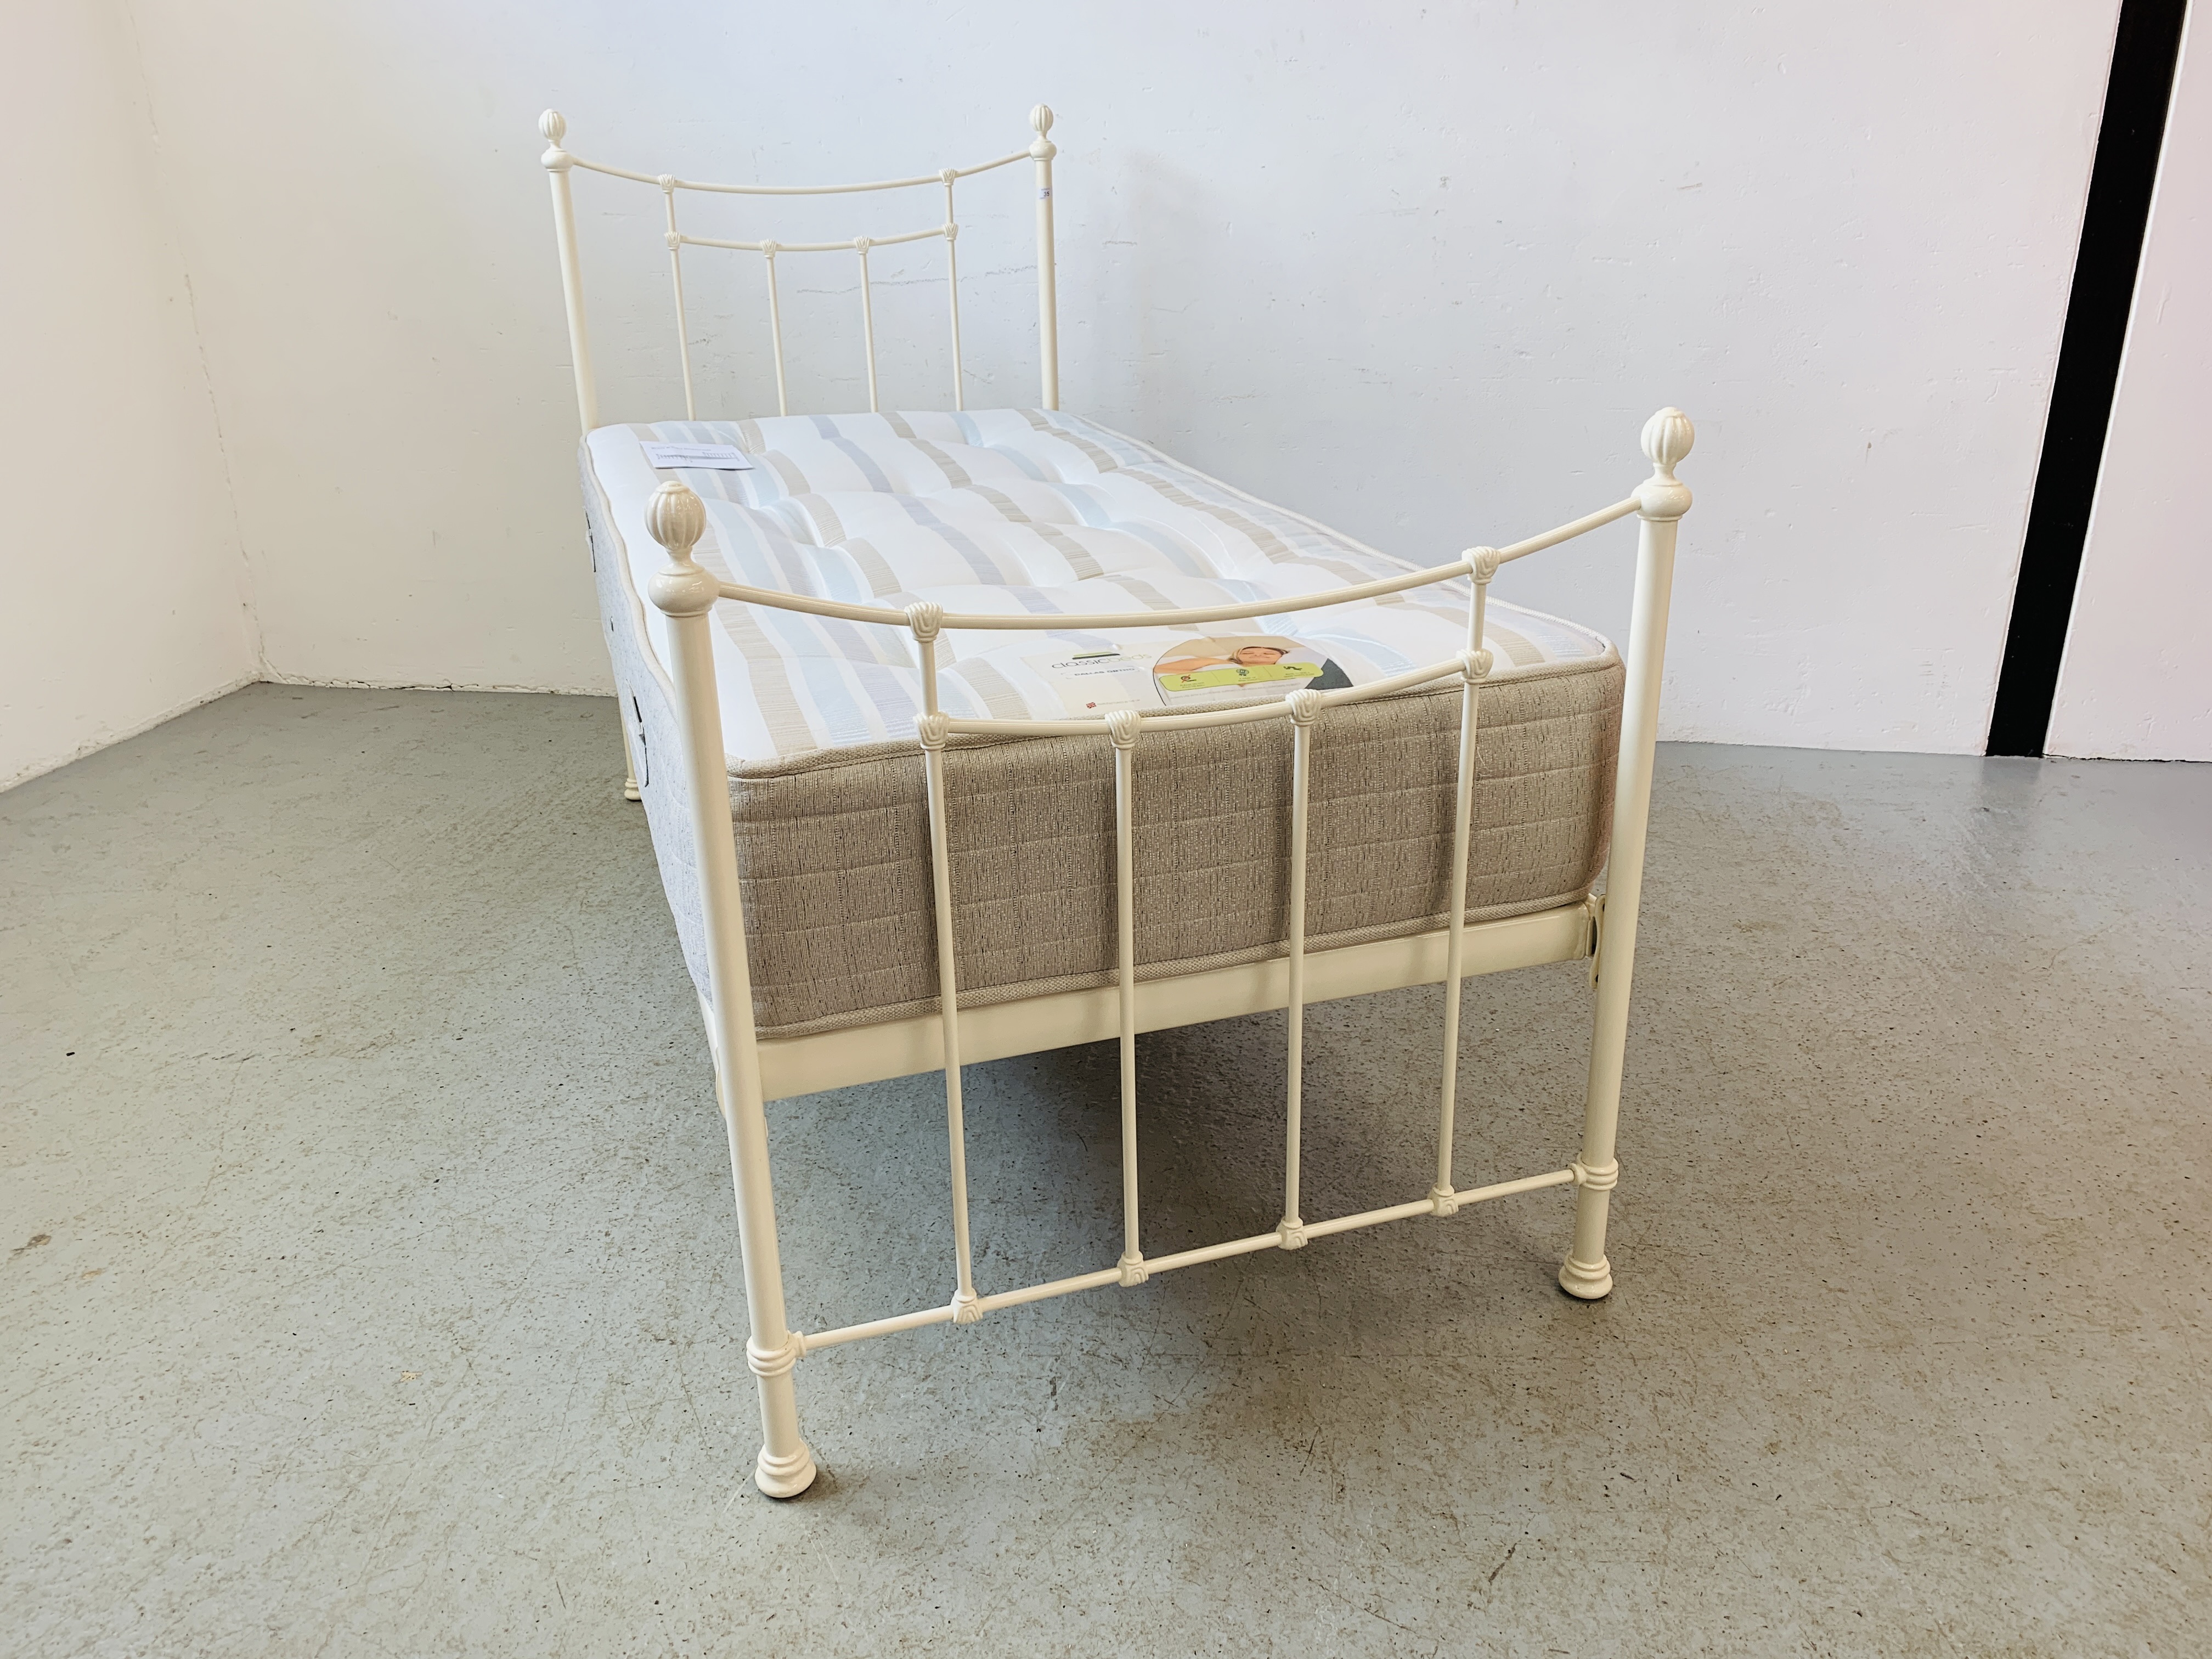 QUALITY MODERN METAL FRAMED SINGLE BED FRAME & CLASSIC BEDS DALLAS ORTHO MATTRESS